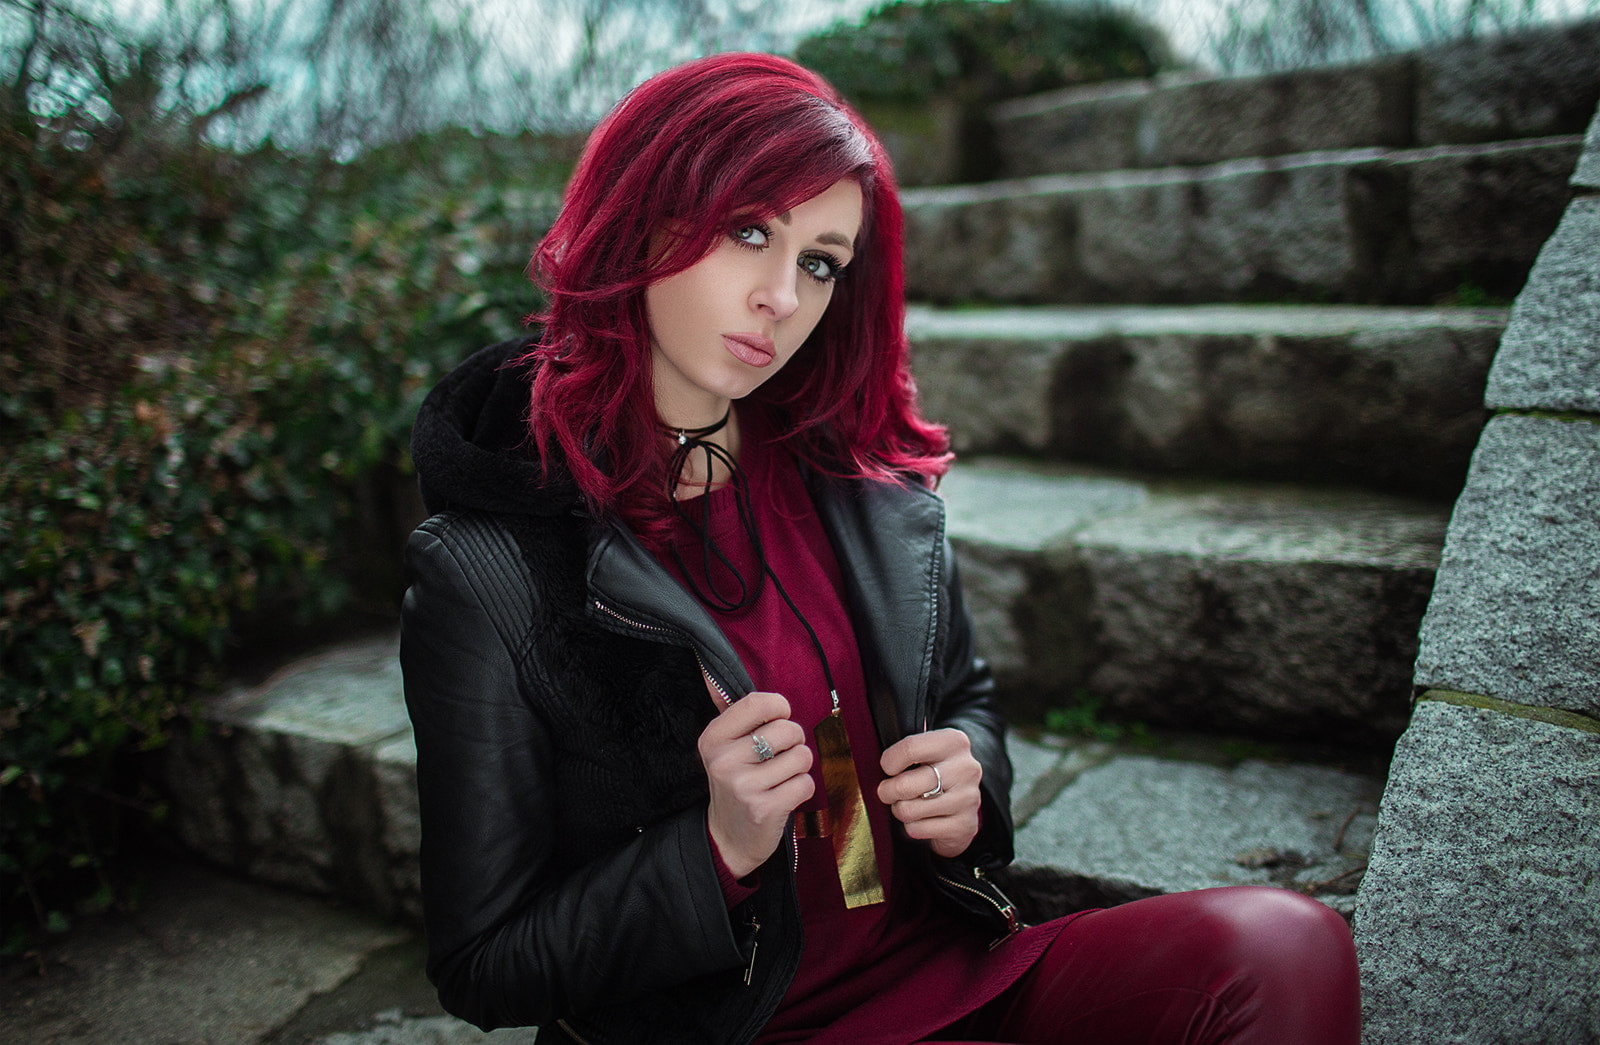 women, redhead, dyed hair, stairs, depth of field, portrait